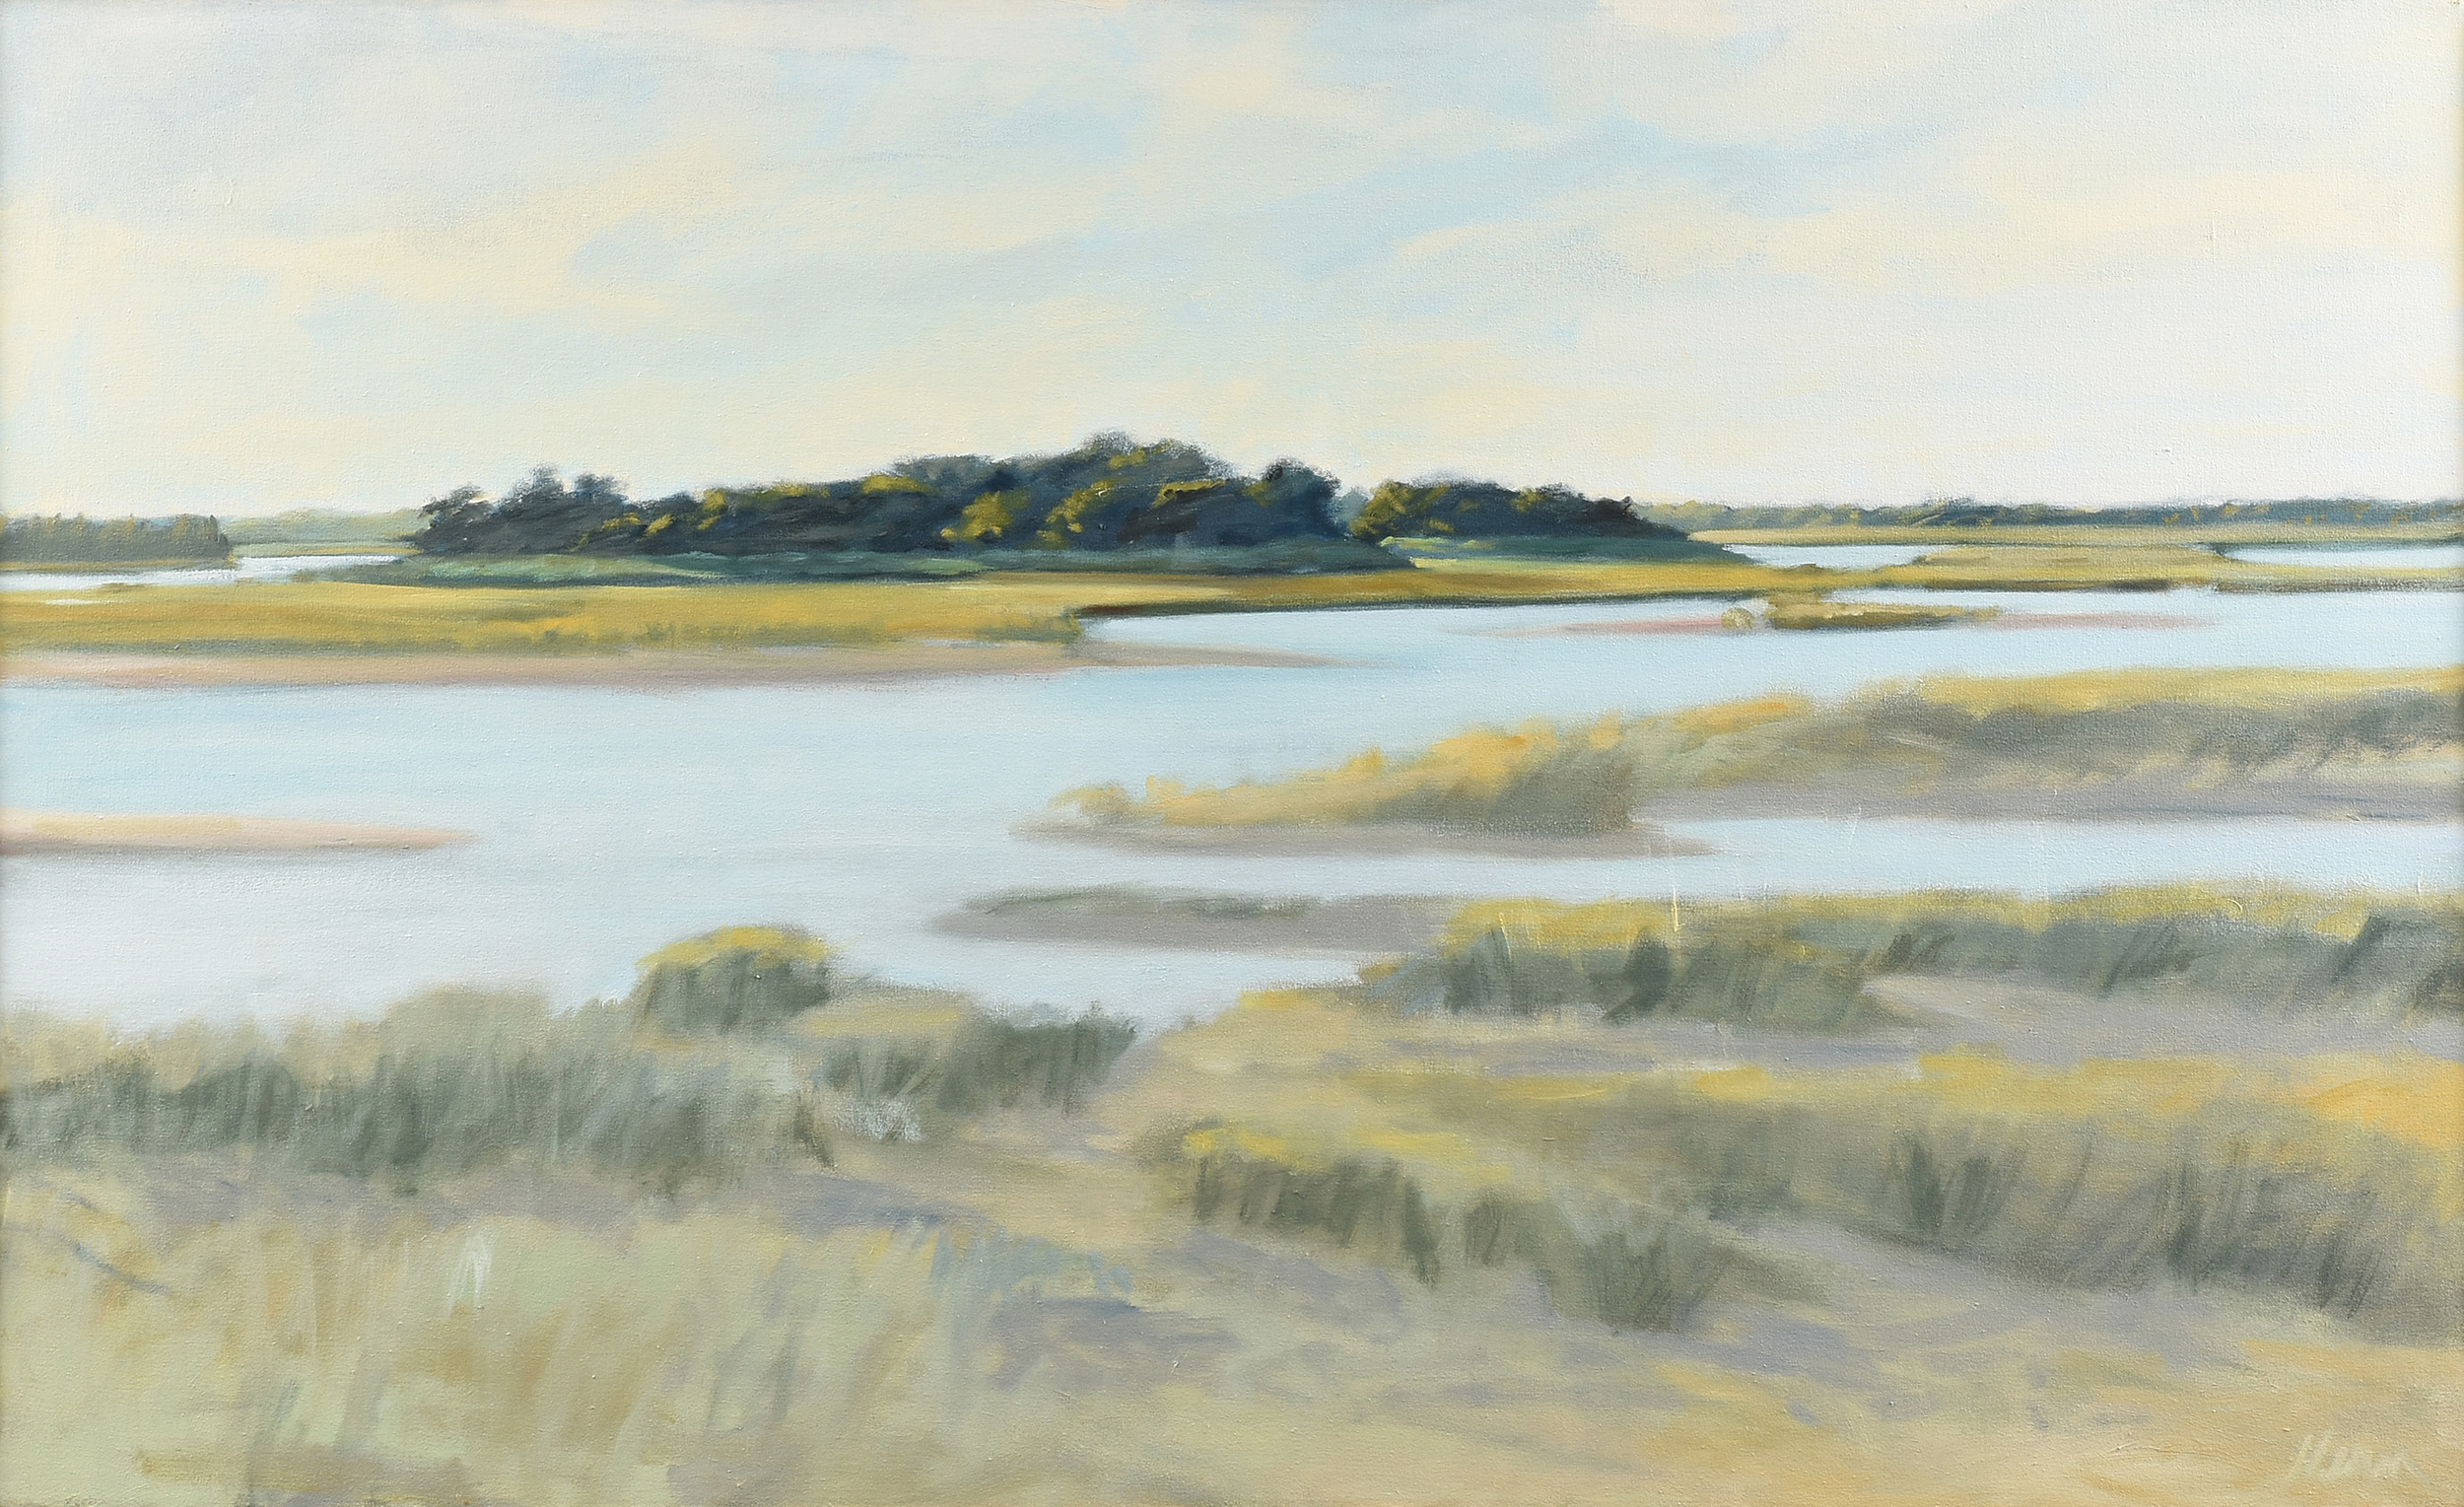 GAIL KERN (American 20th/21st Century) A PAINTING, "Marshland in Landscape," oil on canvas, signed